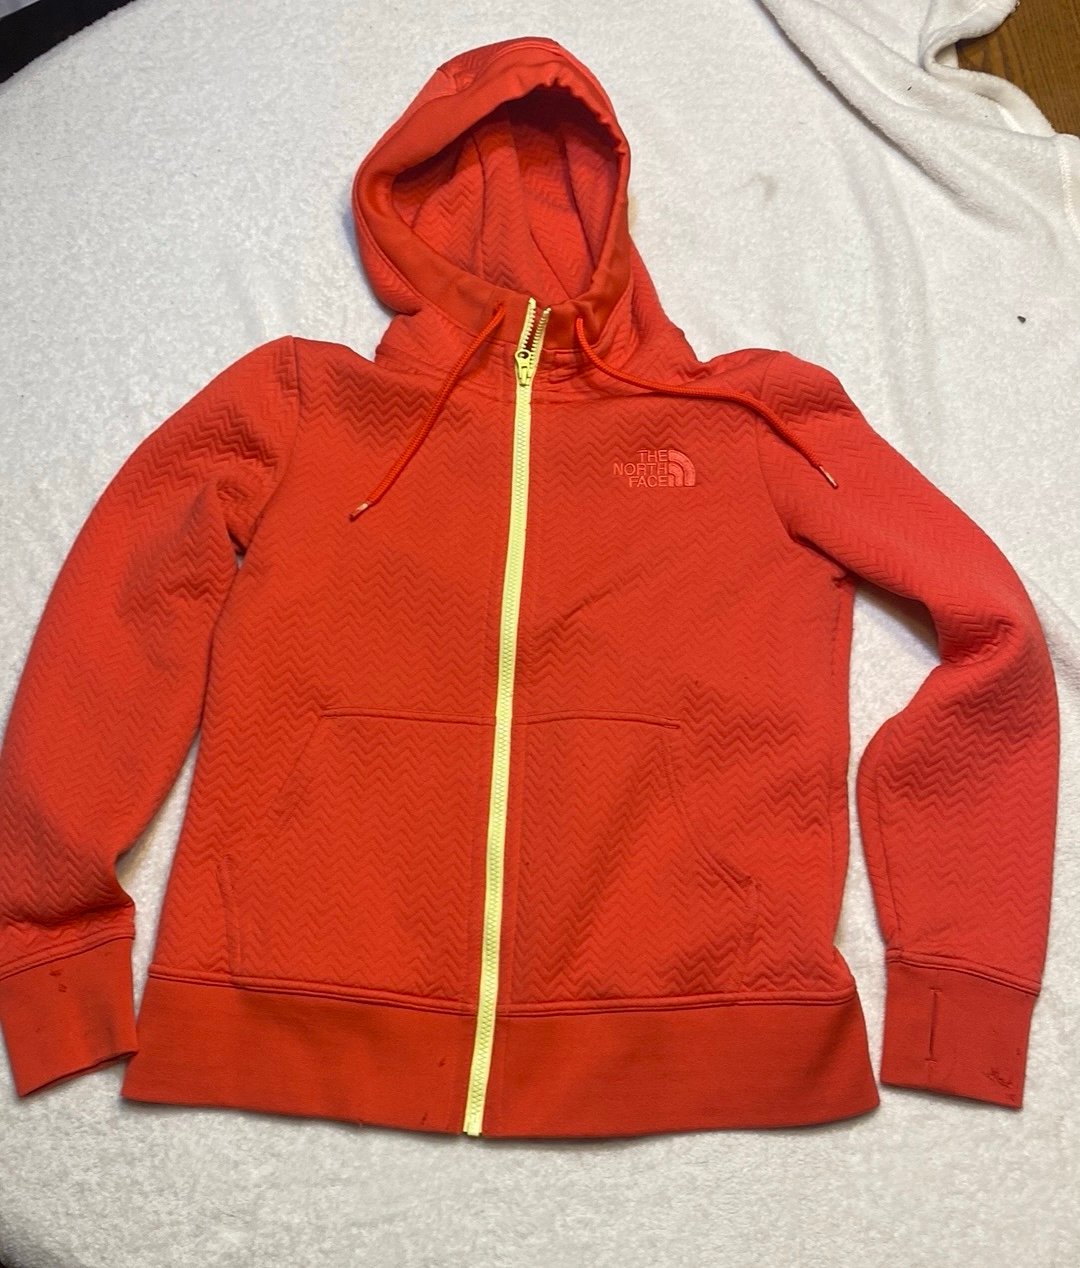 Amazing The North Face zip up hoodie NbwpQ1mHS Factory Price